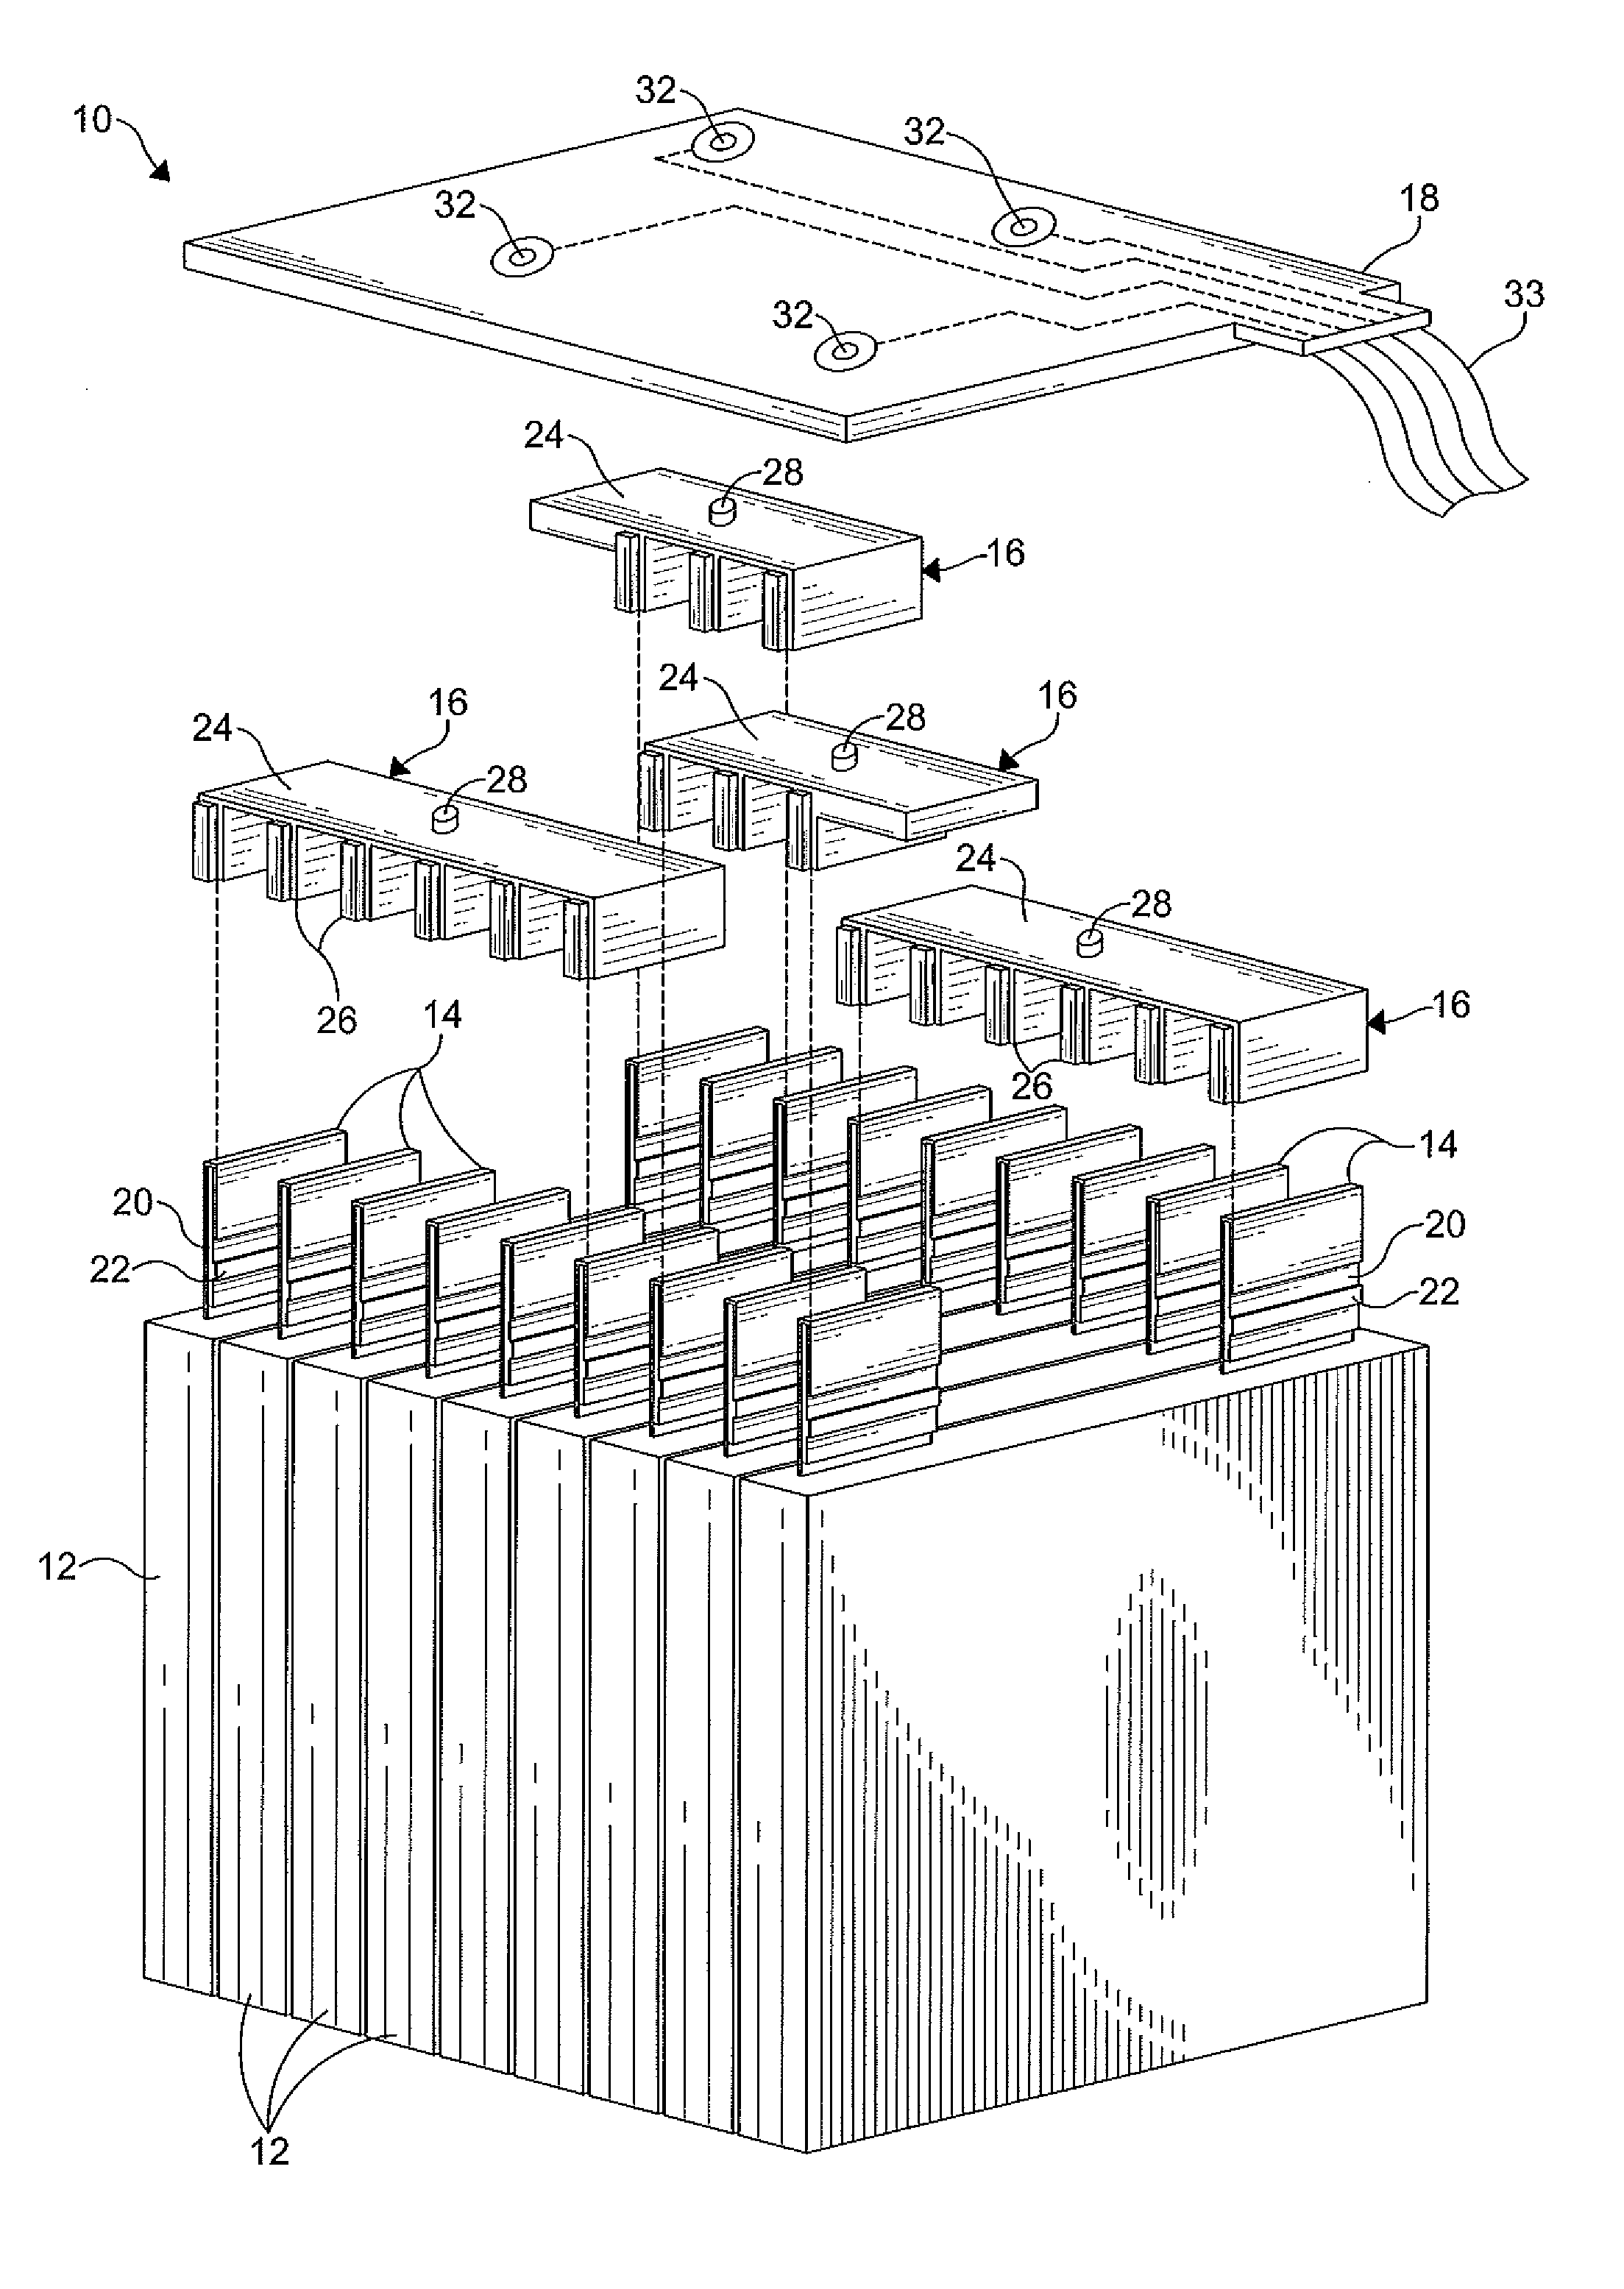 Reversible battery assembly and tooling for automated high volume production